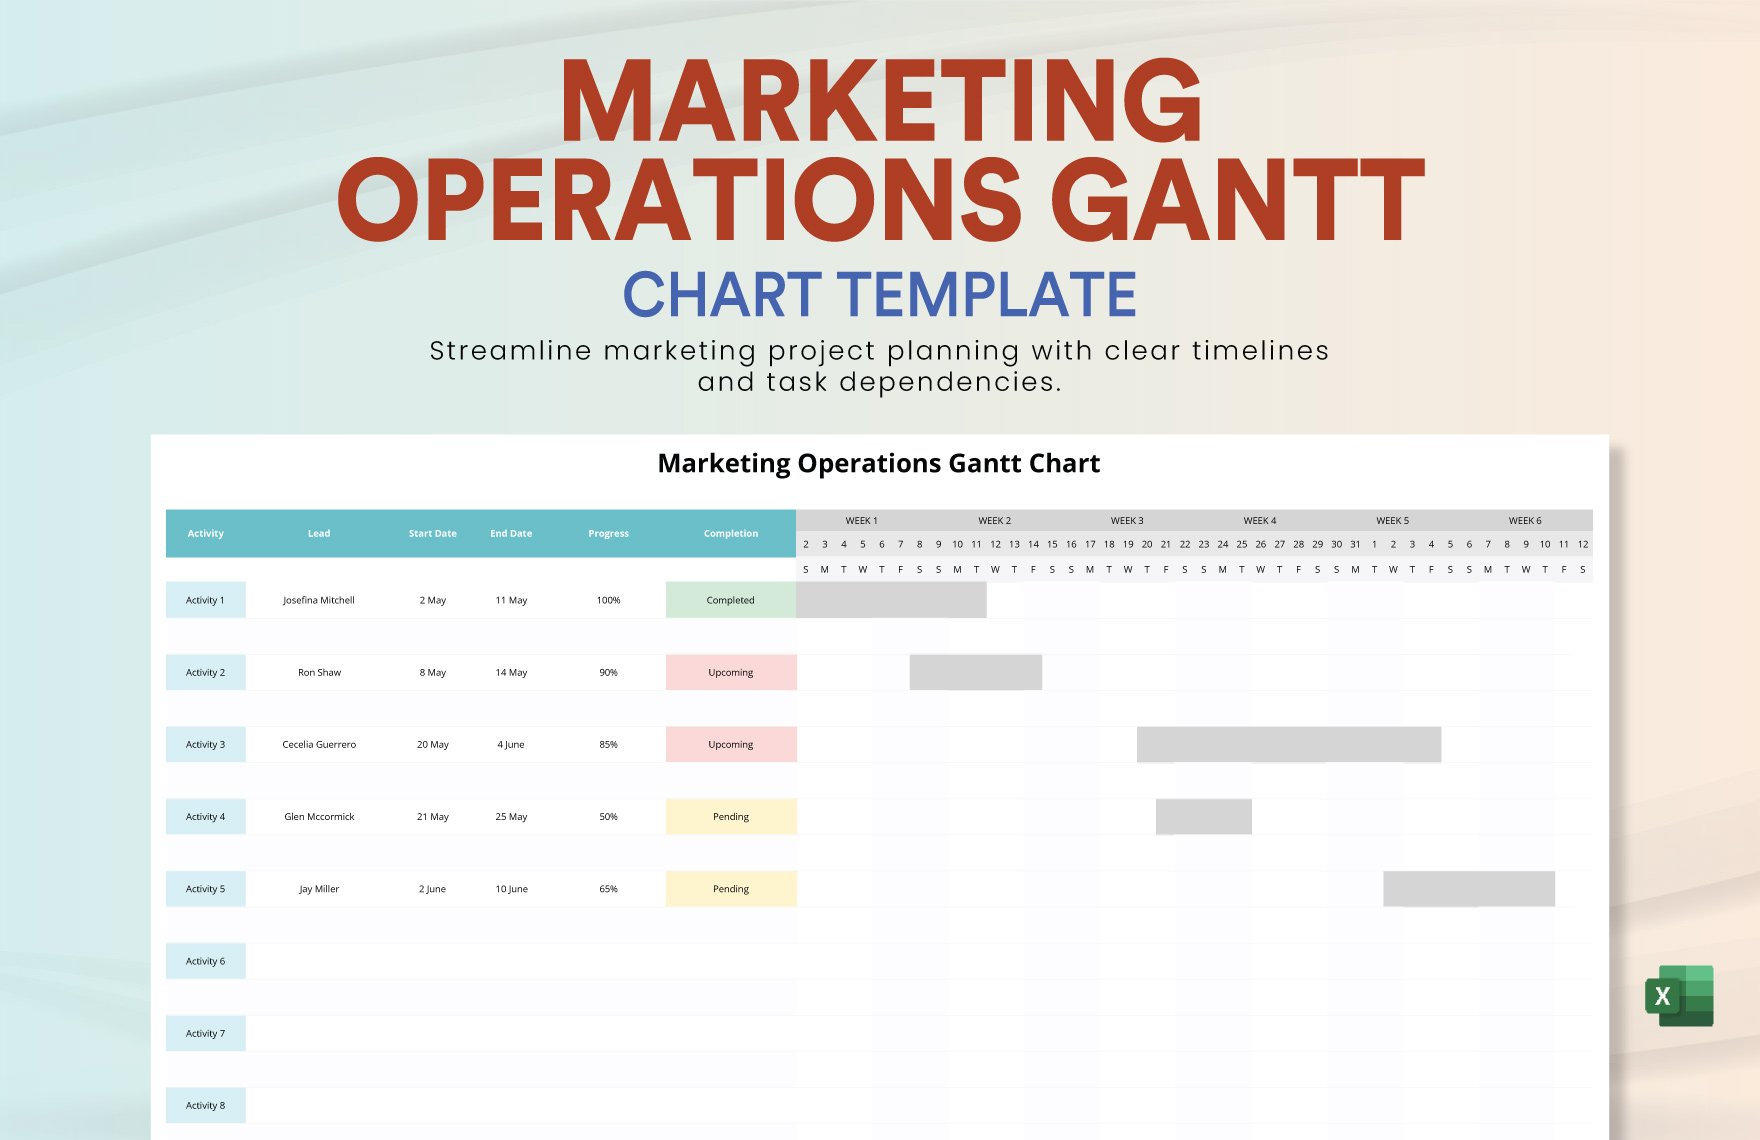 Marketing Operations Gantt Chart Template in Excel